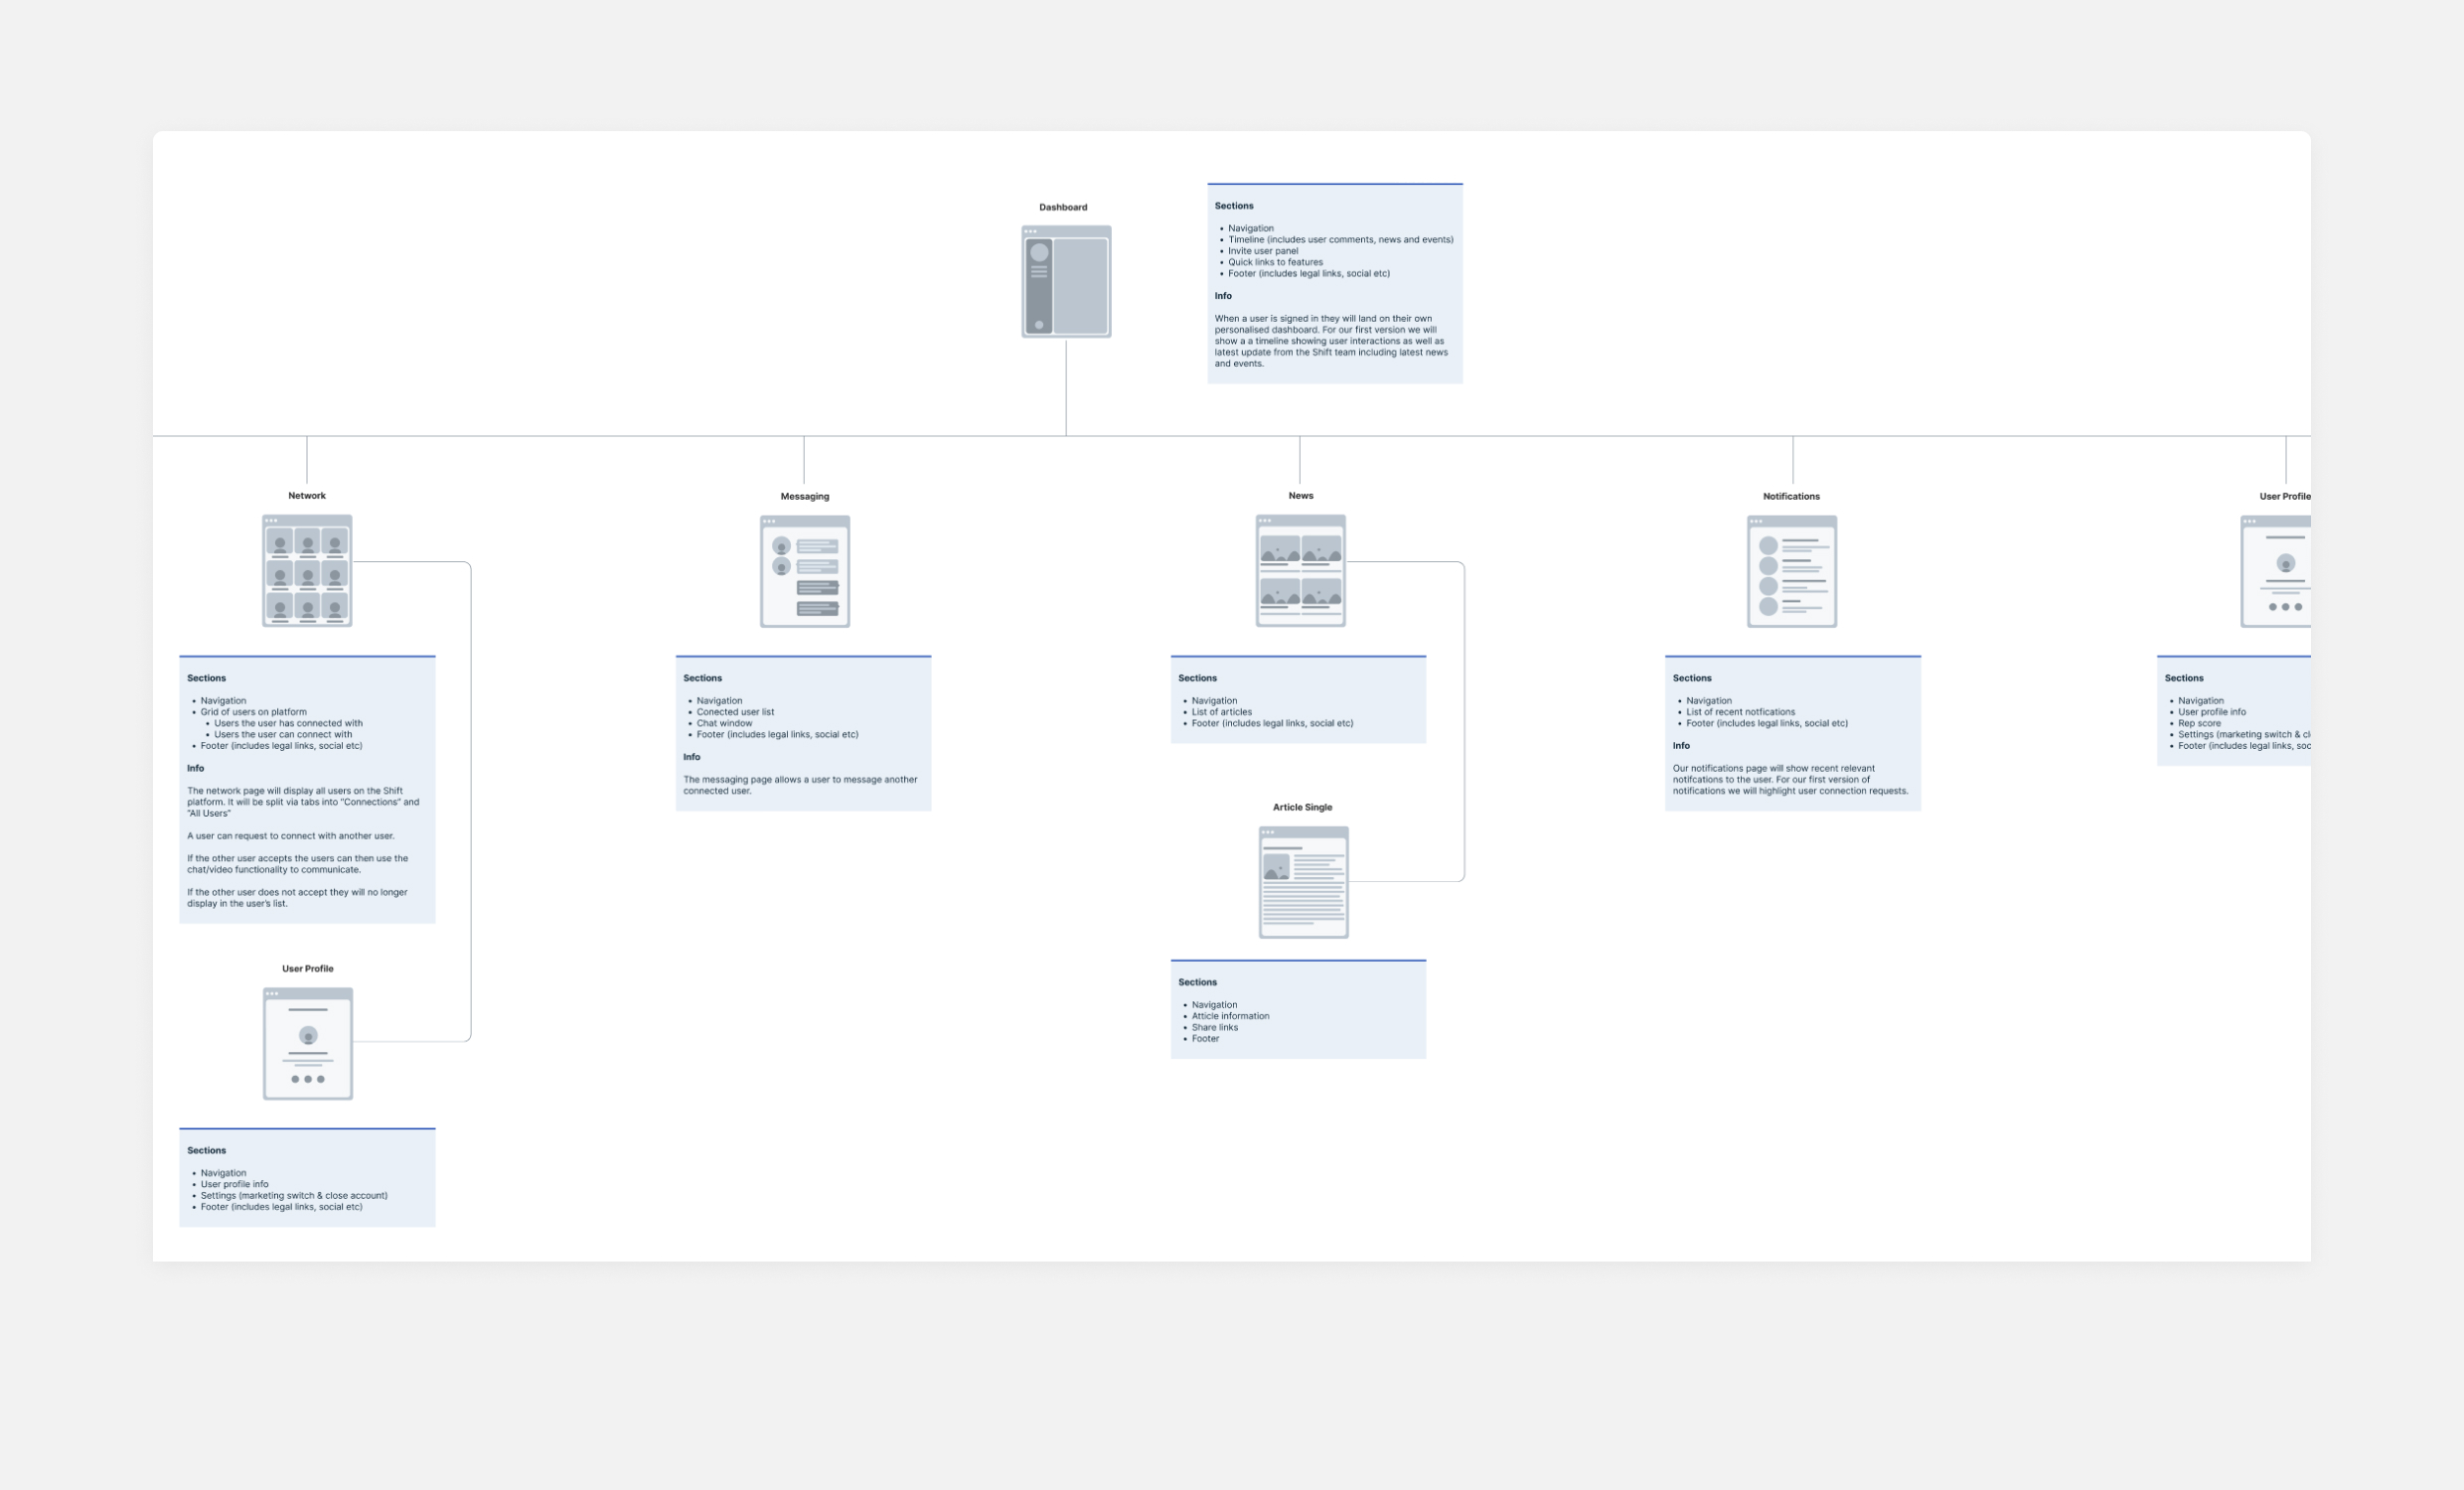 A screenshot of a product sitemap showing the various sections of the Shift platform